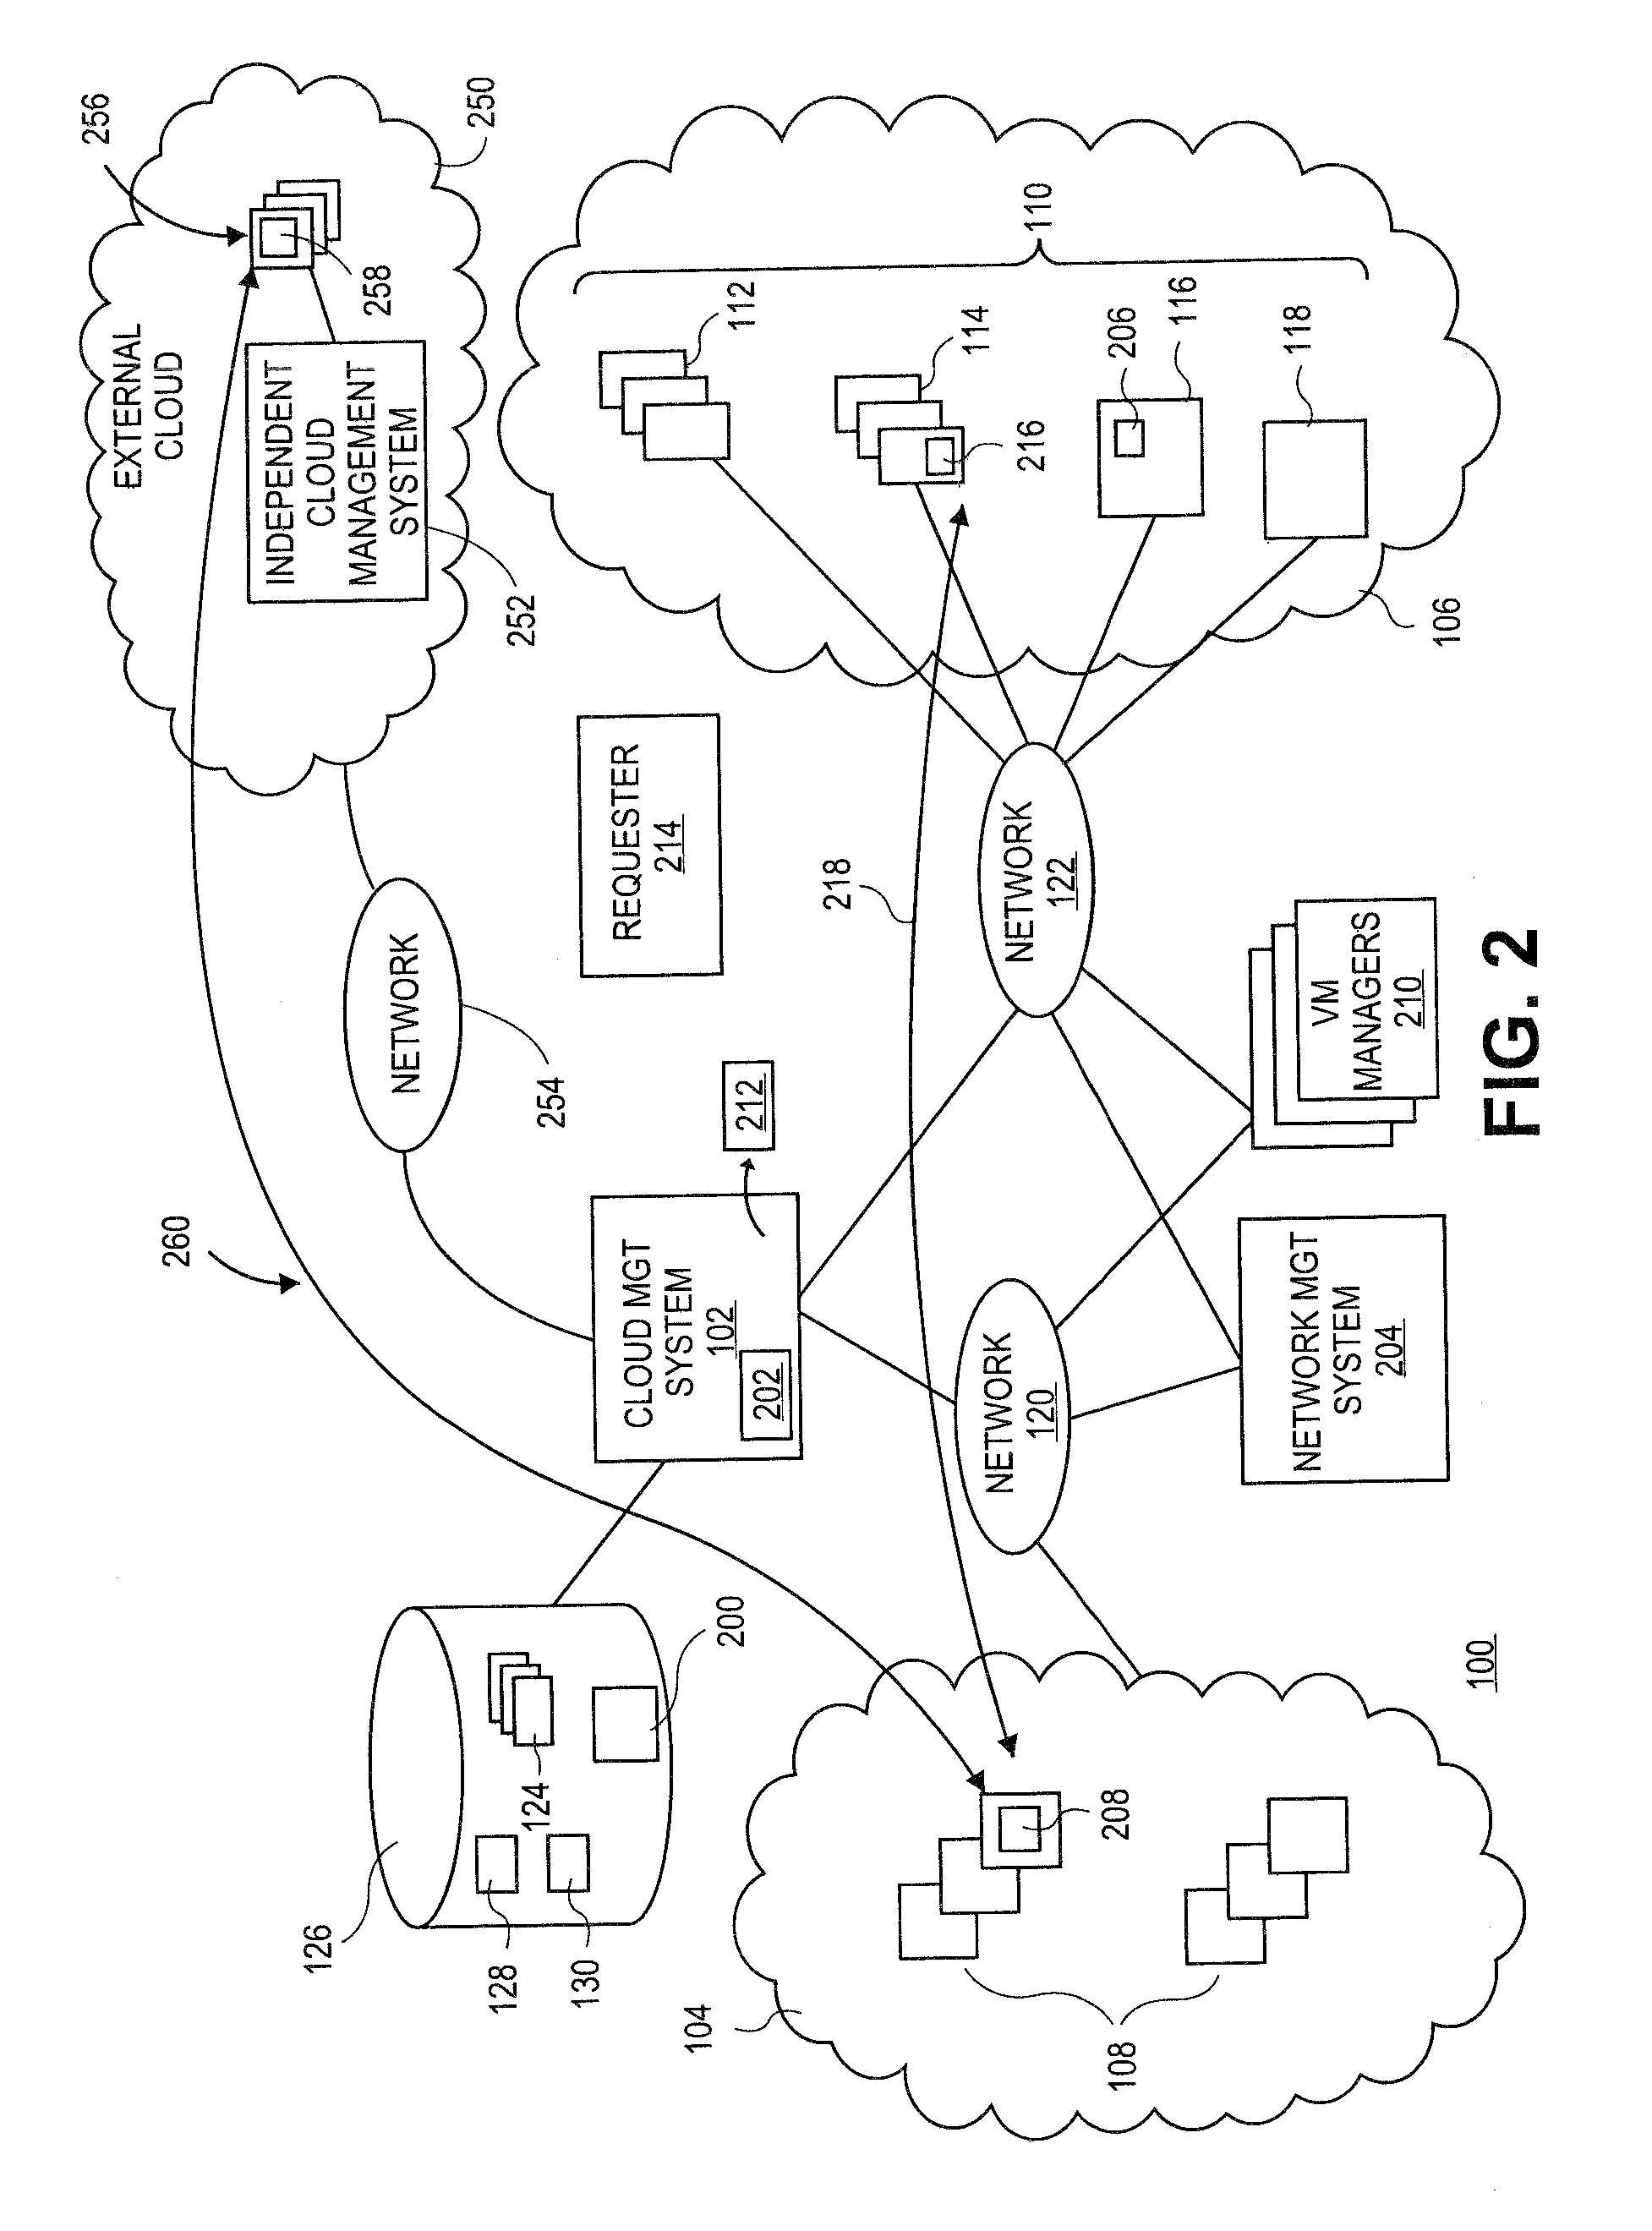 Methods and systems for abstracting cloud management to allow communication between independently controlled clouds